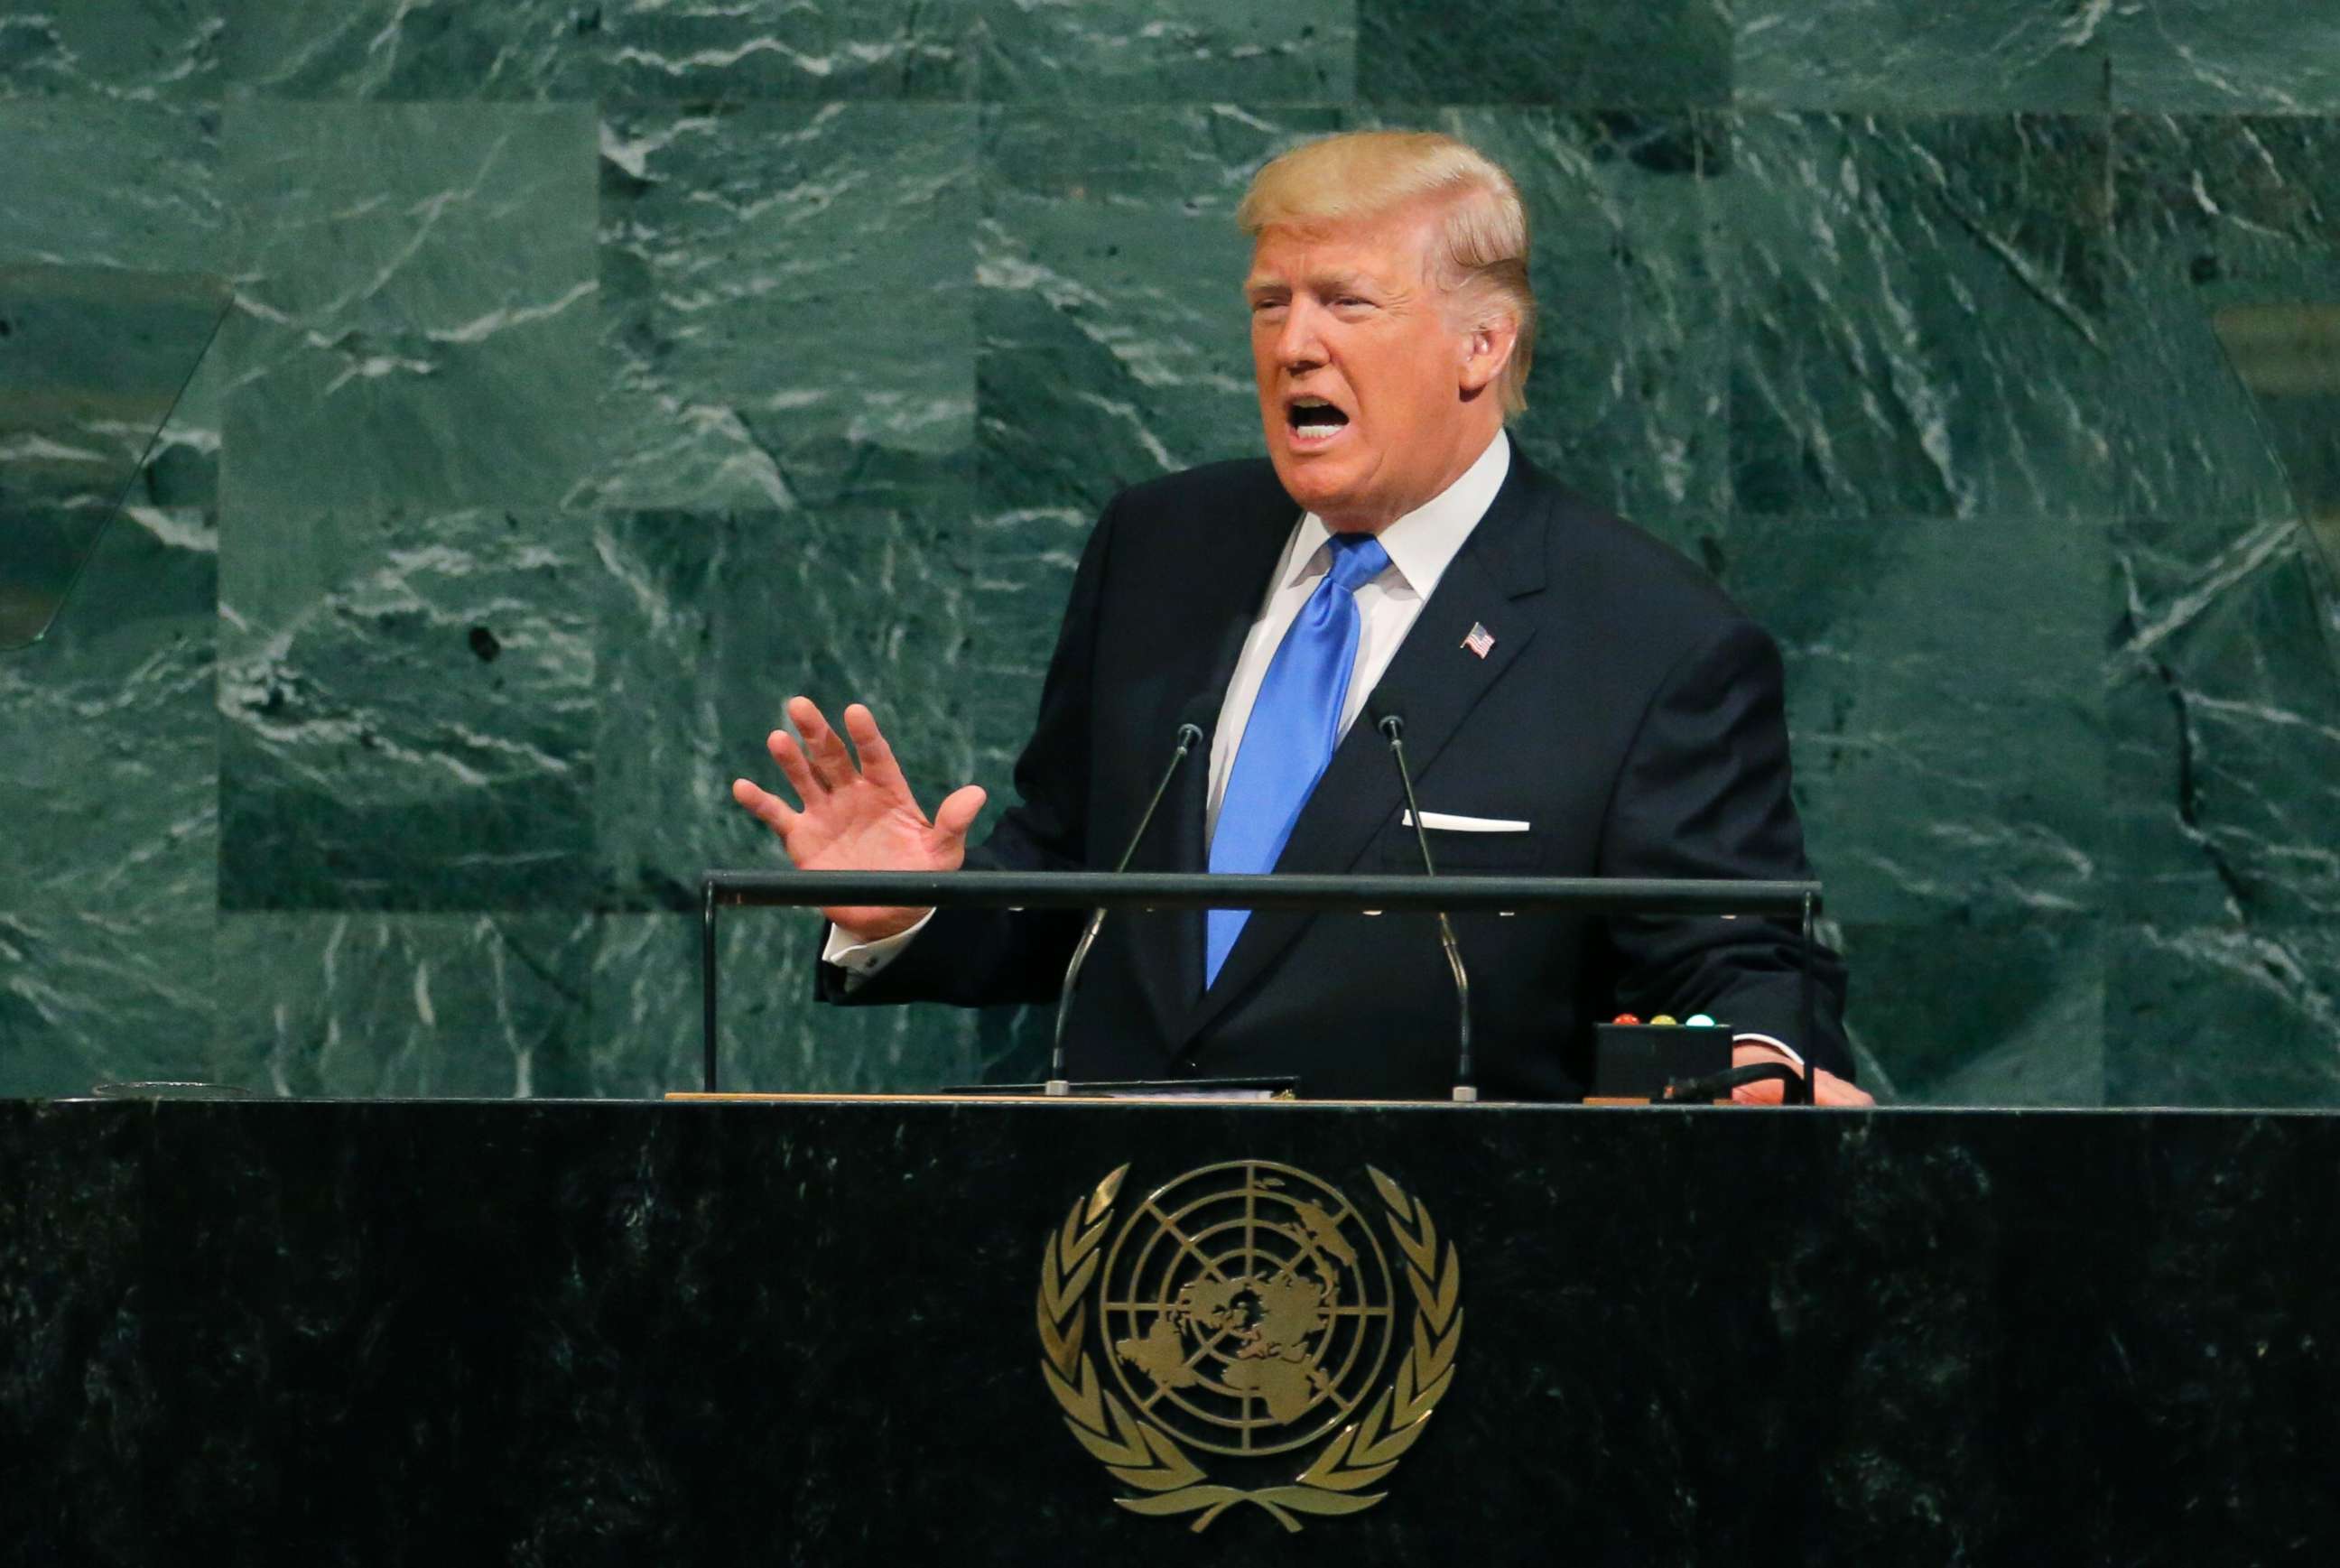 PHOTO: President Donald Trump addresses the 72nd United Nations General Assembly at U.N. headquarters in New York, Sept. 19, 2017. 